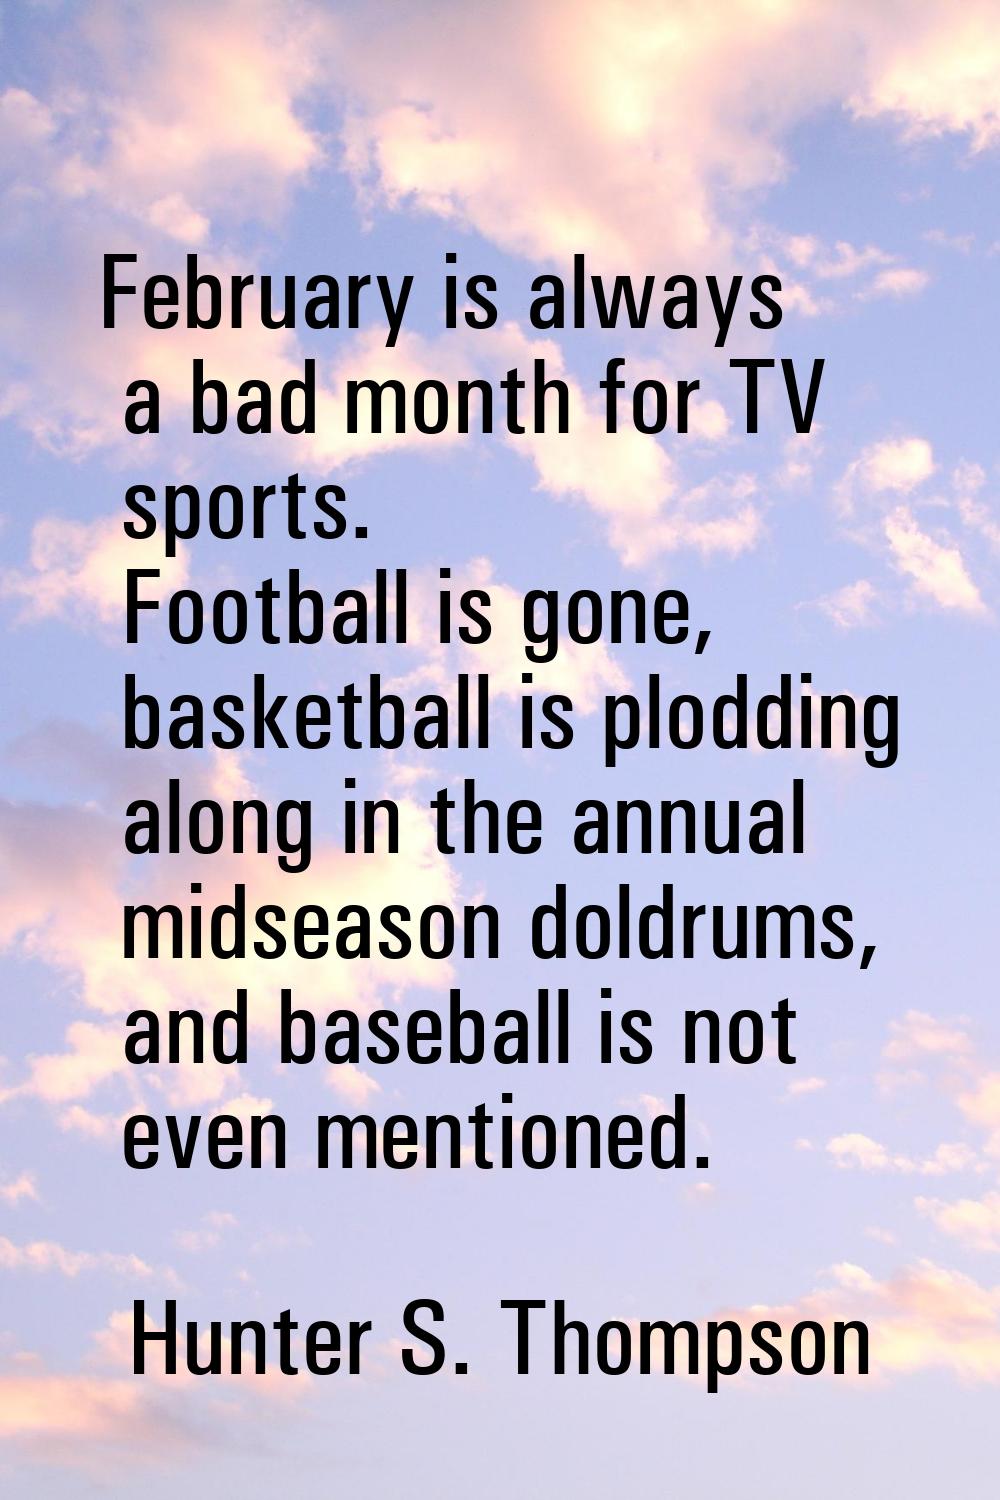 February is always a bad month for TV sports. Football is gone, basketball is plodding along in the